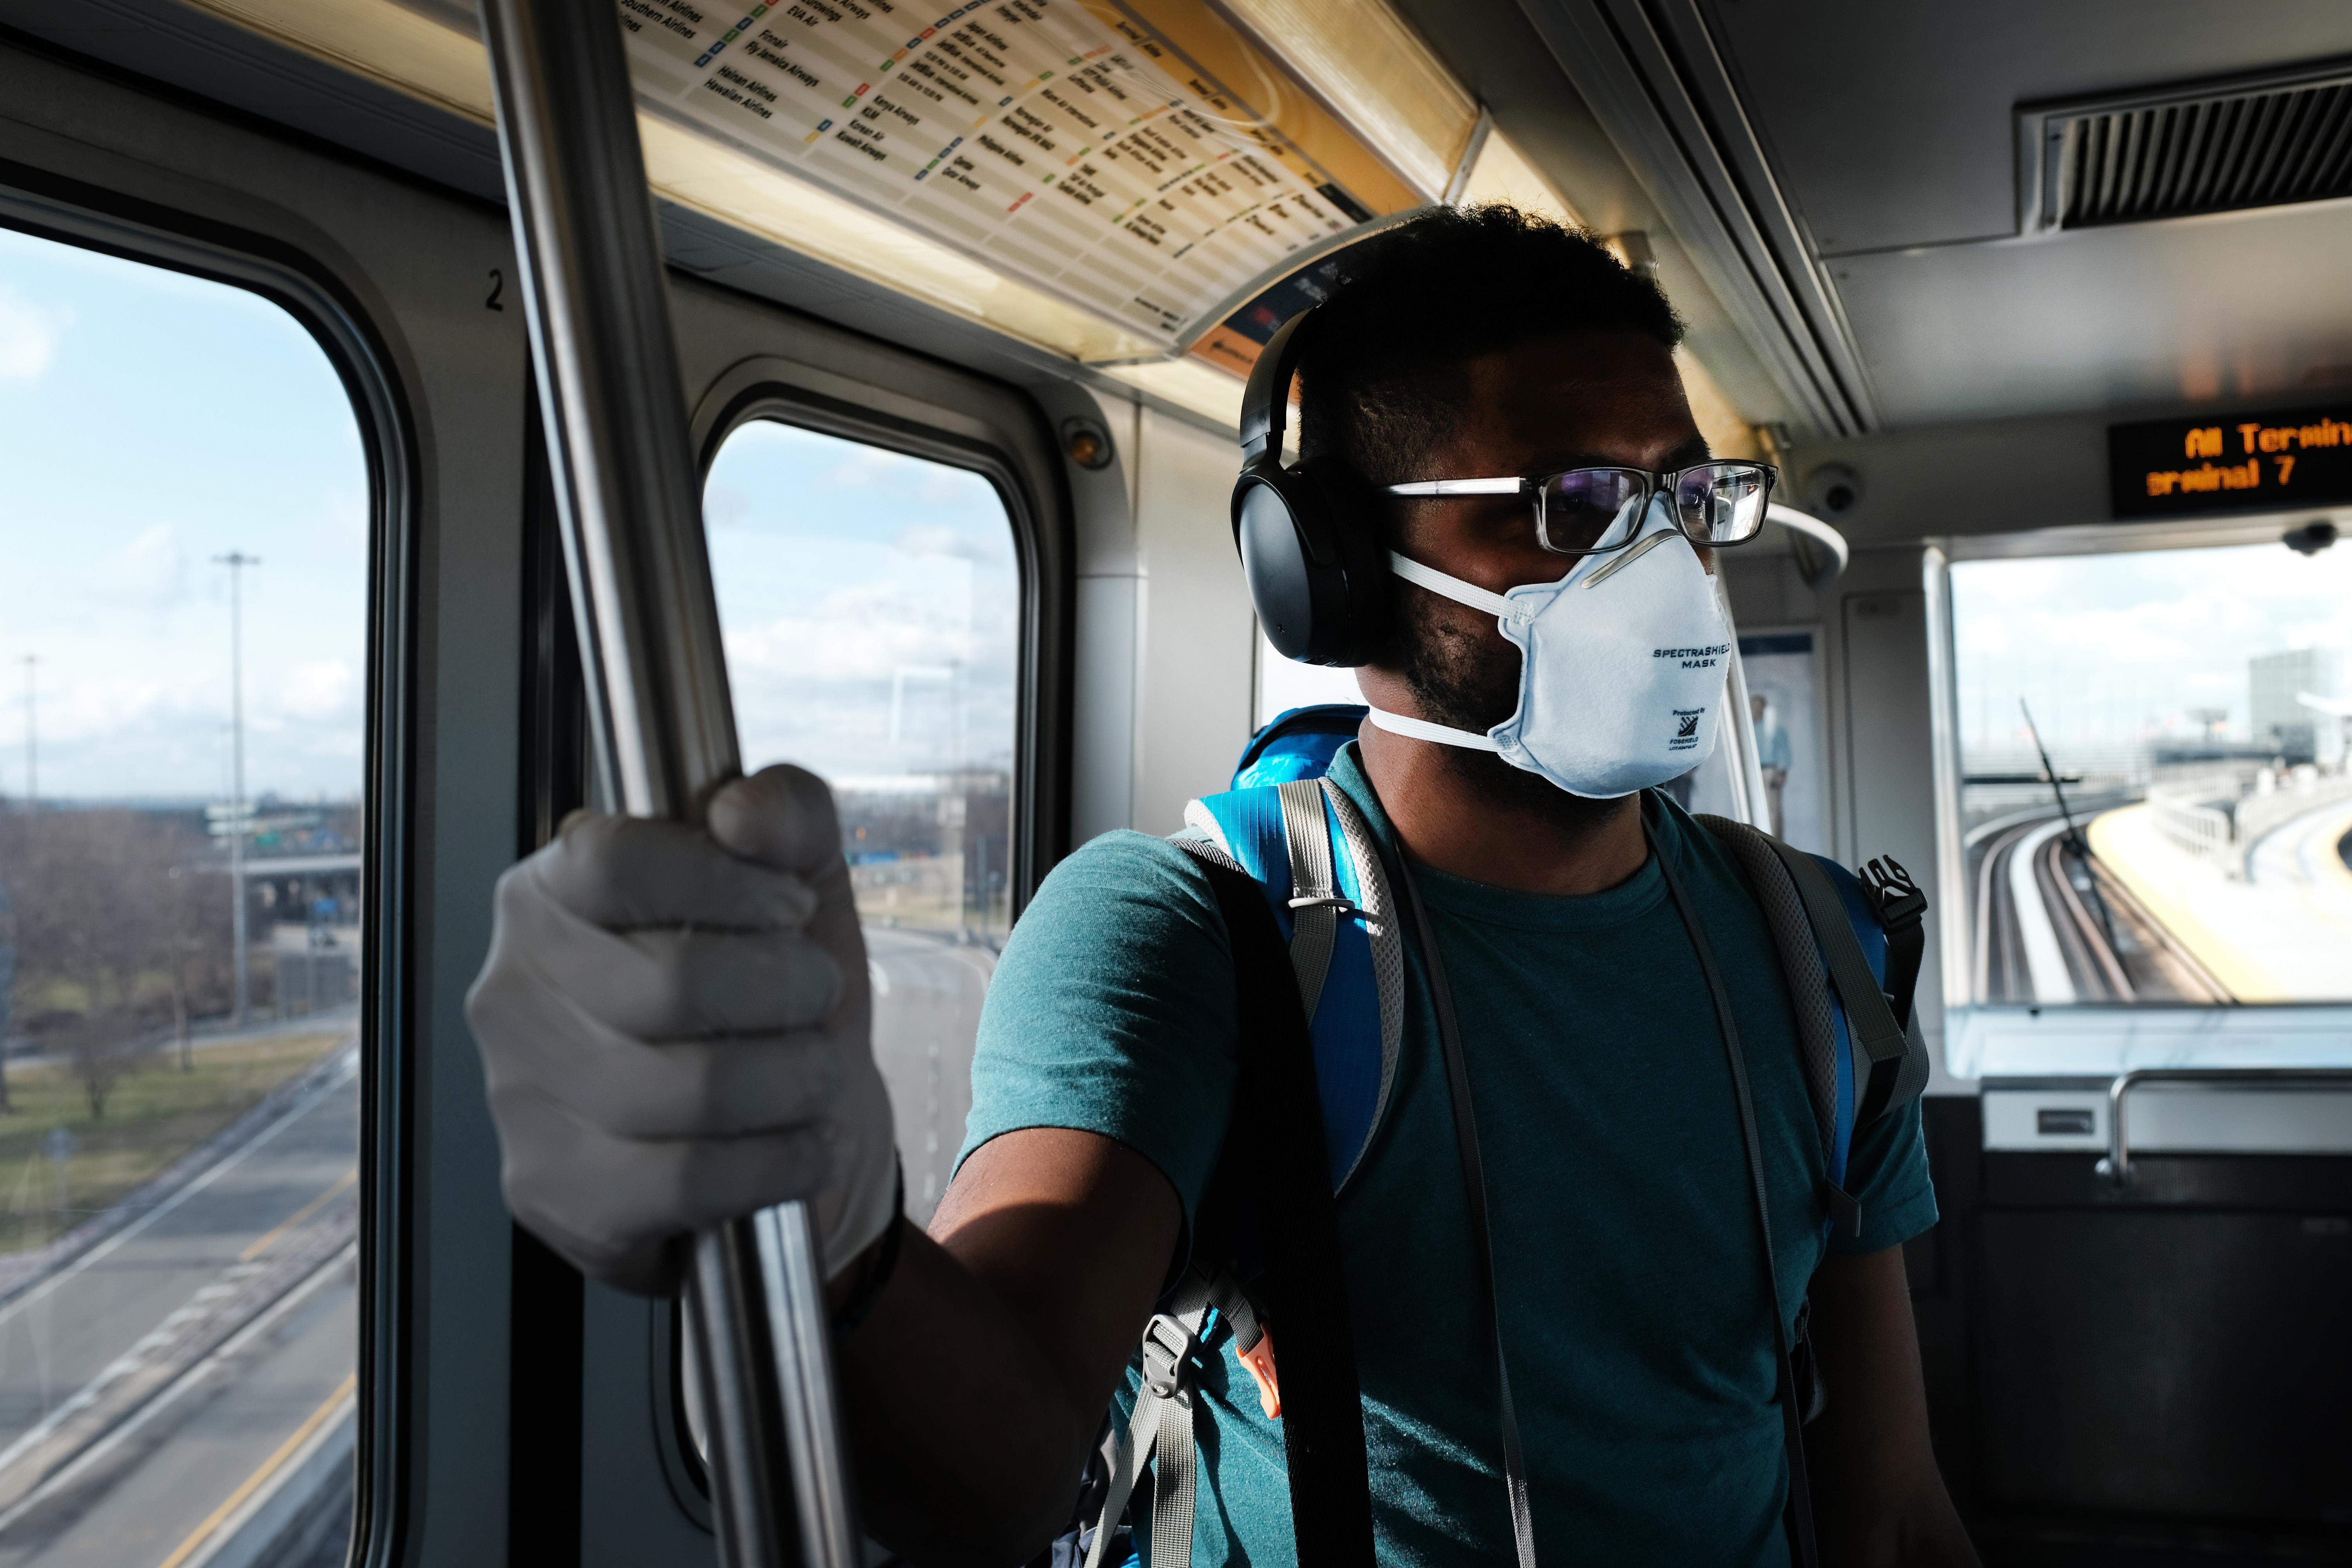 A man wears a medical mask on the AirTrain as concern over the coronavirus grows enroute to John F. Kennedy Airport (JFK) on March 7, 2020 in New York City. 